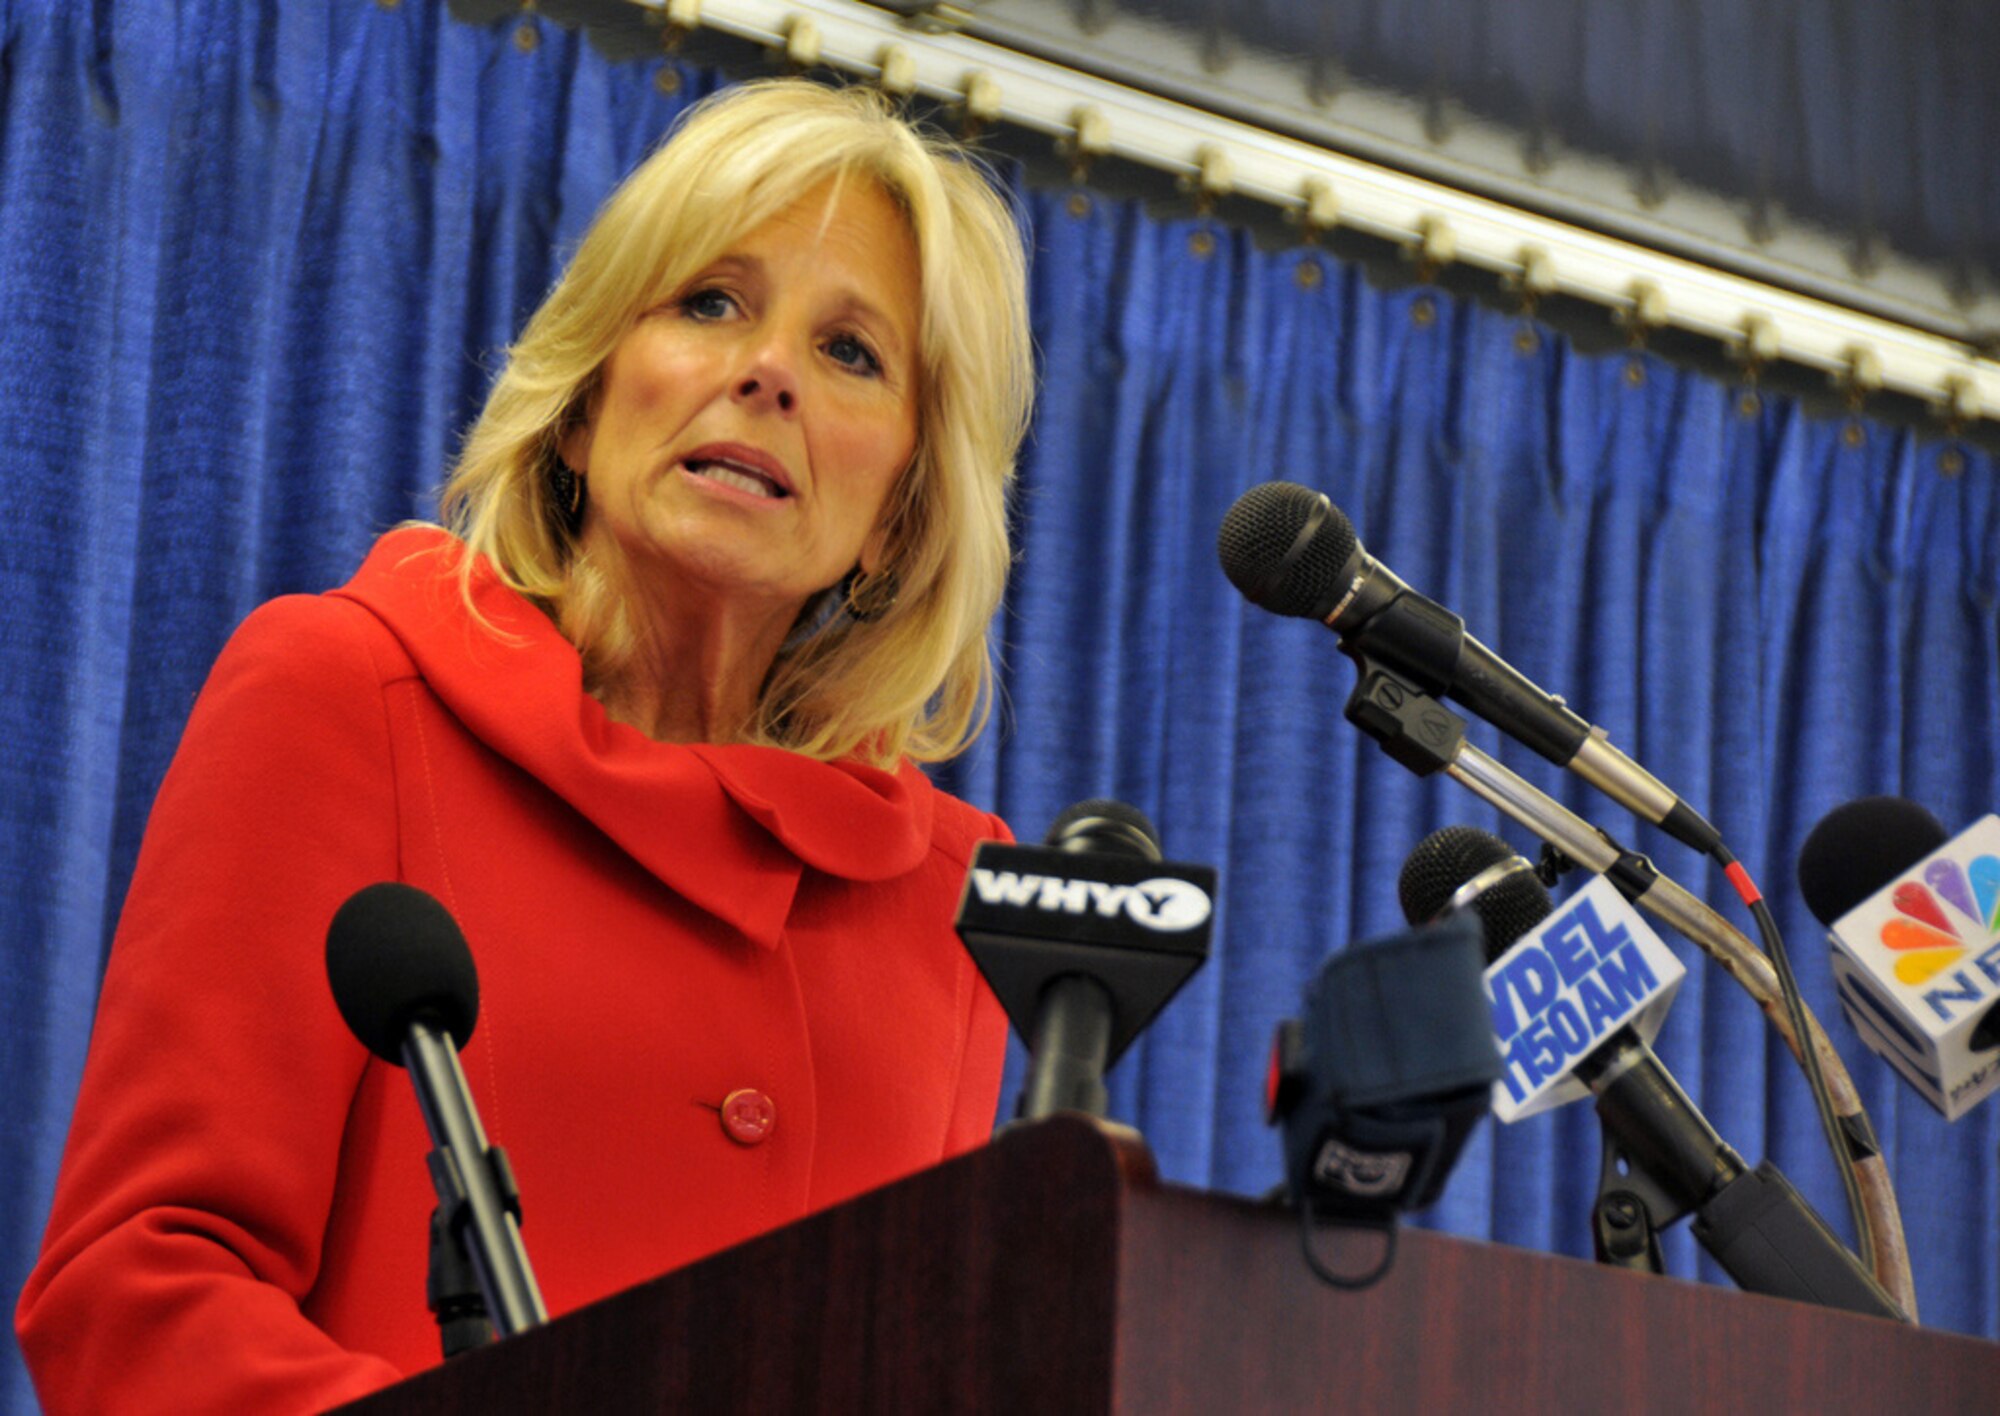 Jill Biden, wife of Vice President Joe Biden, speaks during a call-to-duty ceremony March 4, 2011, at the Delaware Air National Guard's 166th Airlift Wing in New Castle, Del. Members of the 166th AW are scheduled to deploy to Southwest Asia to provide logistical and aeromedical evacuation support to Soldiers and Marines in support of operations Enduring Freedom and New Dawn. (U.S. Air Force photo/Tech. Sgt. John Orrell)